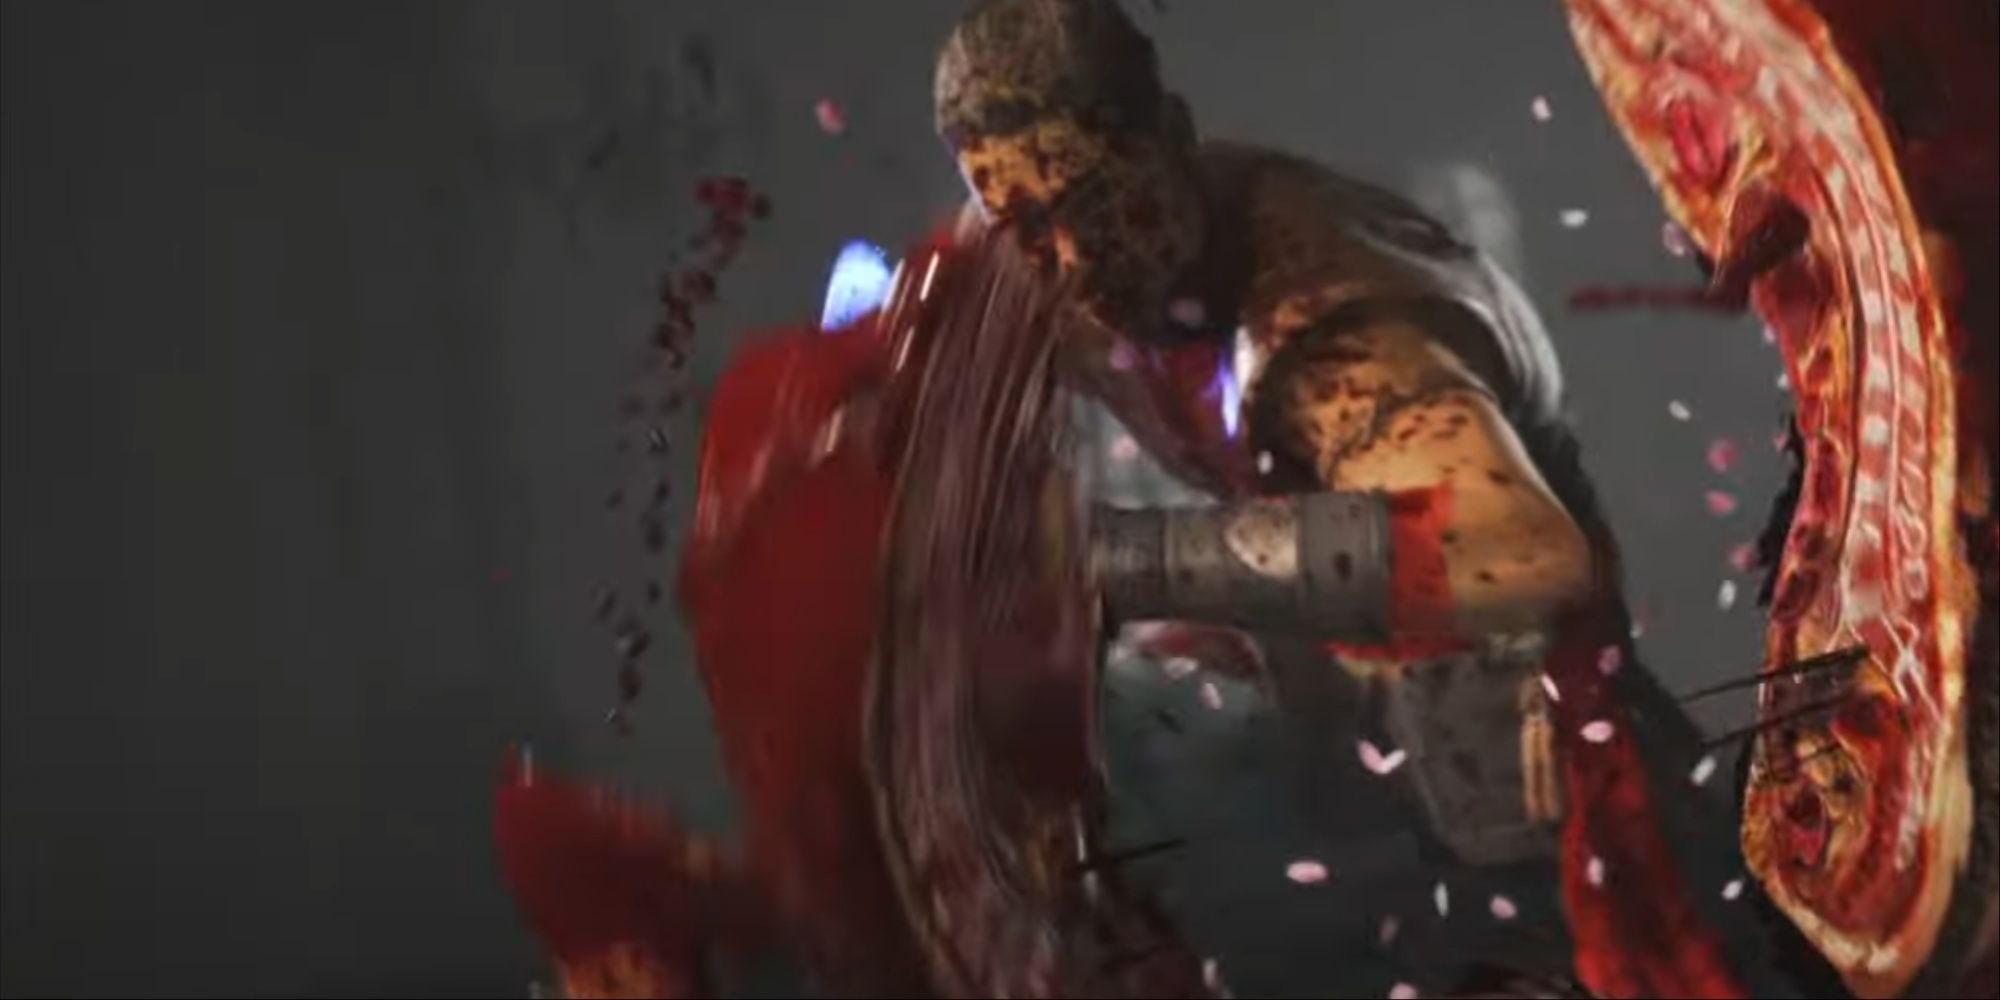 A bloodied Kung Lao captured in between split halves of an opponent's body, meat and insides exposed.